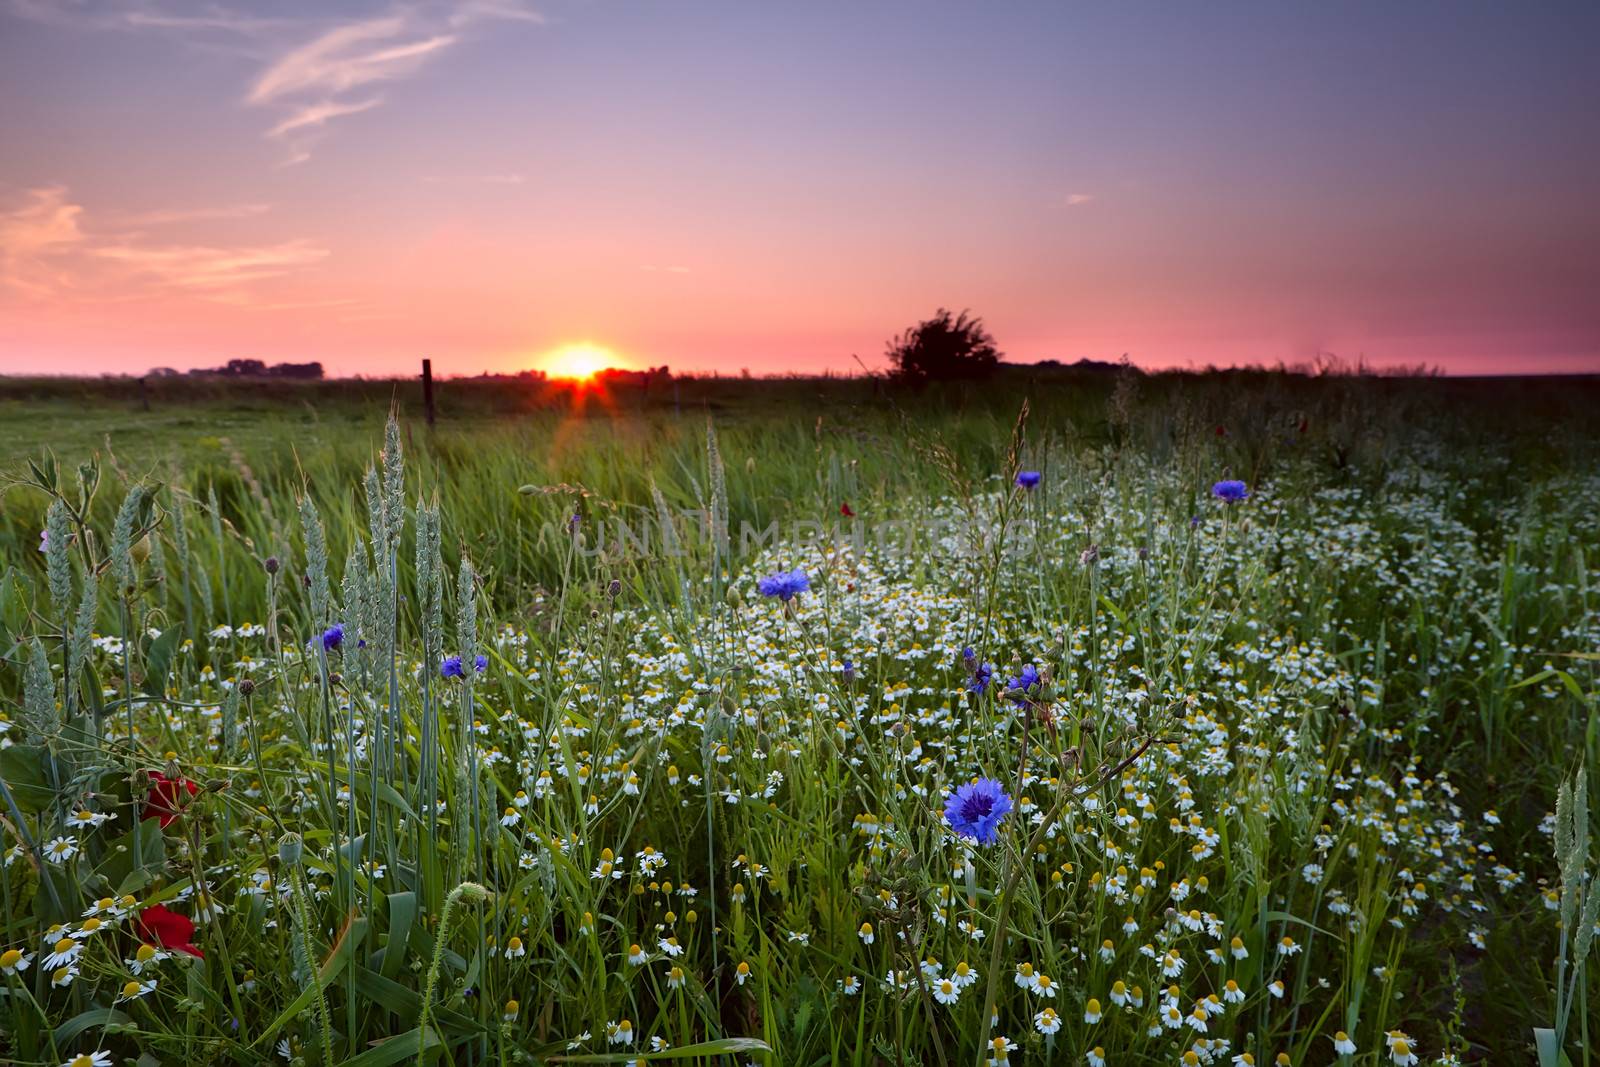 many wildflowers on field at sunset by catolla